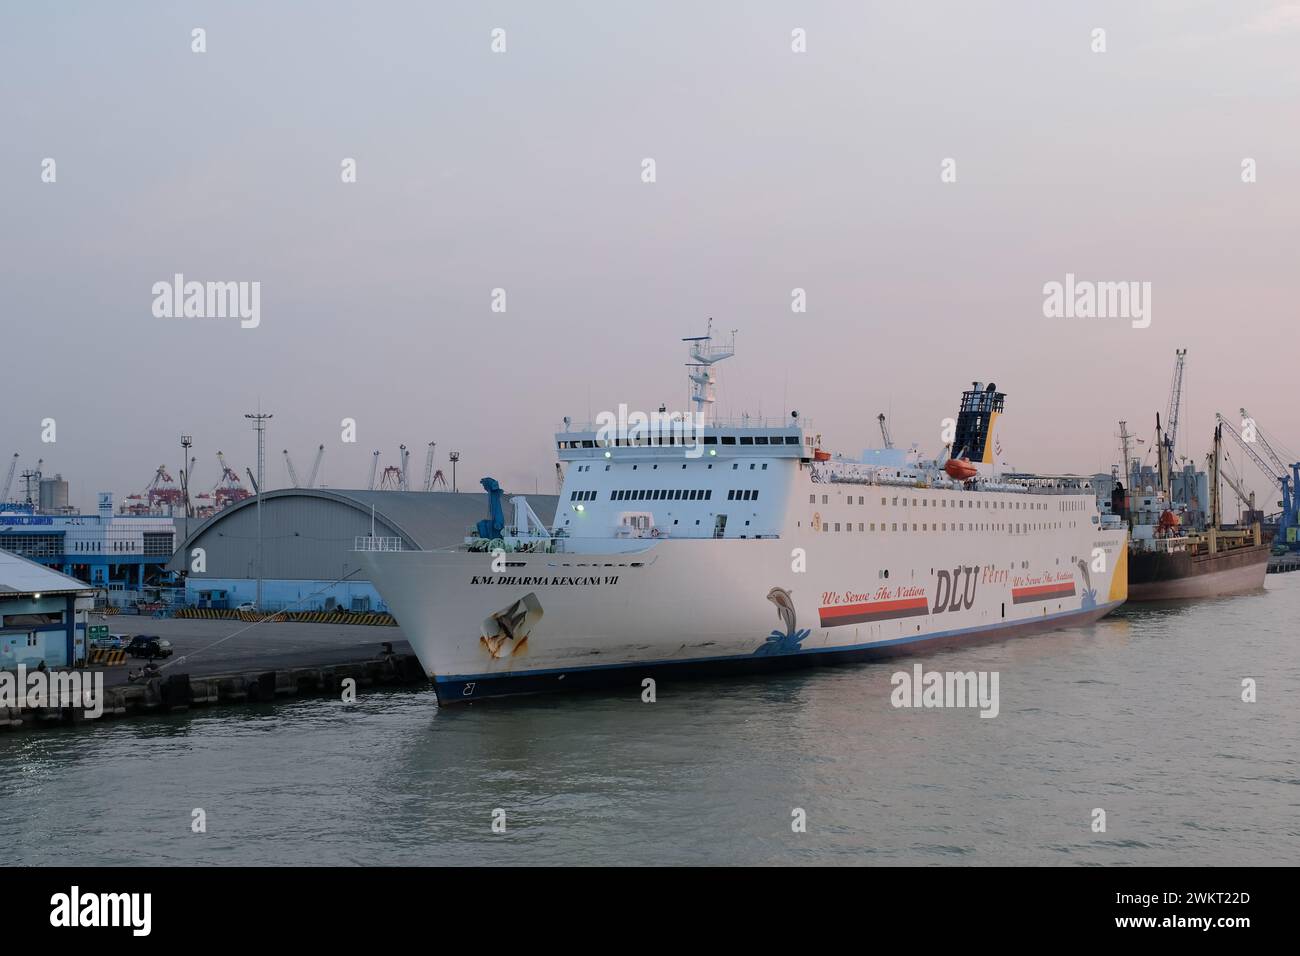 Surabaya, Indonesia, July 27, 2023: Large passenger ships dock at the port to load and unload passengers and goods. water transportation Stock Photo